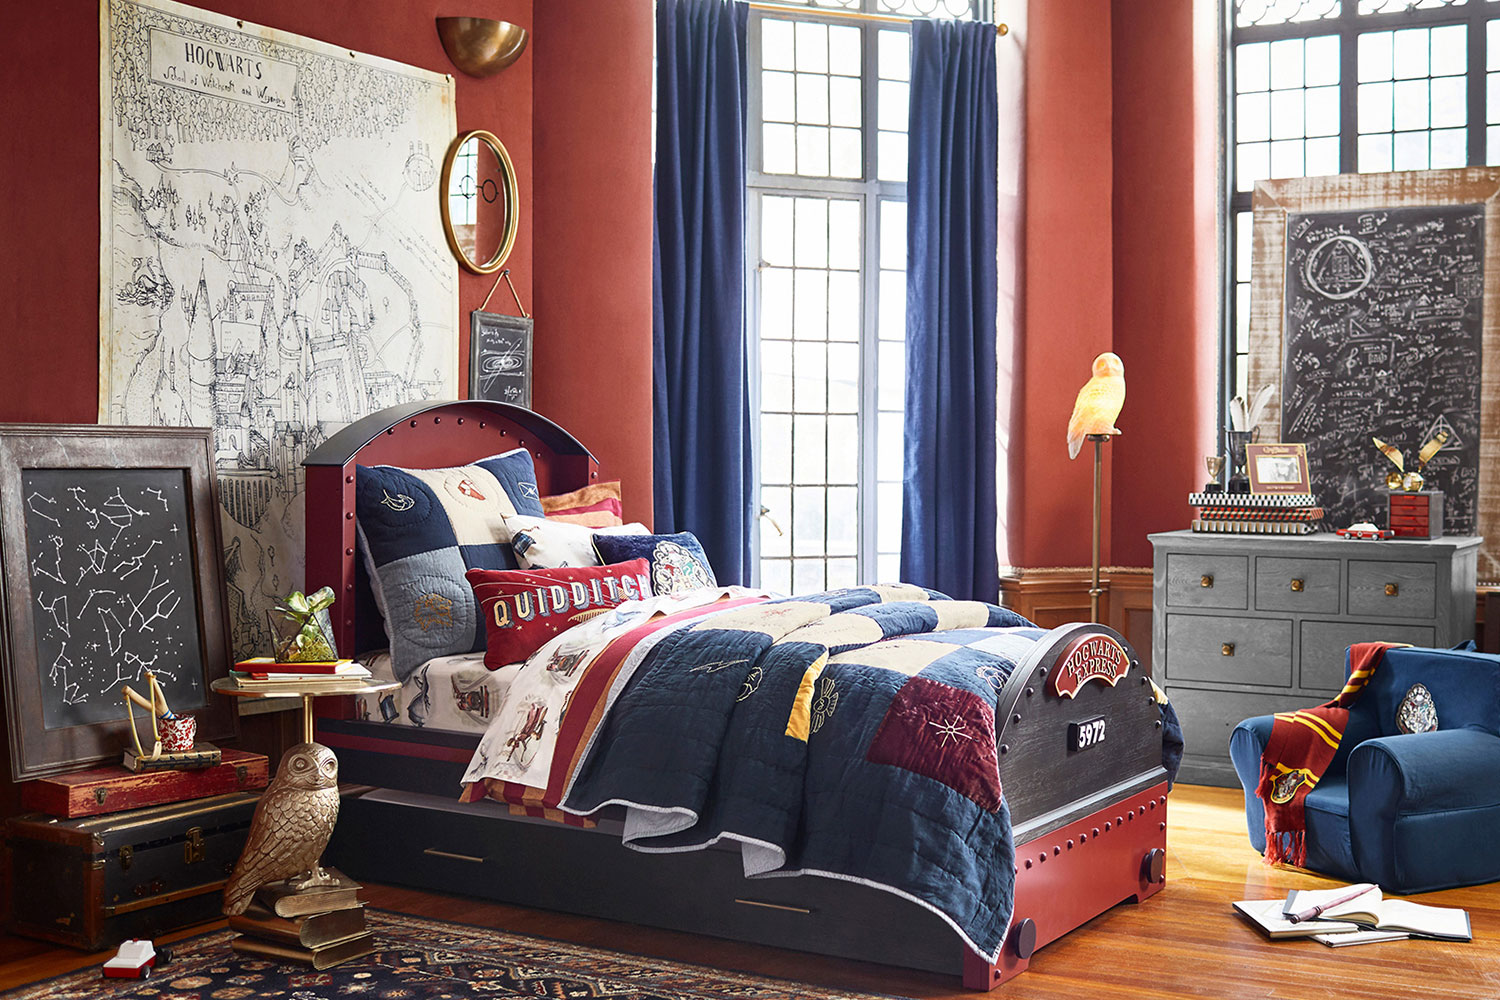 Transform your kid's room with this Harry Potter bedroom collection